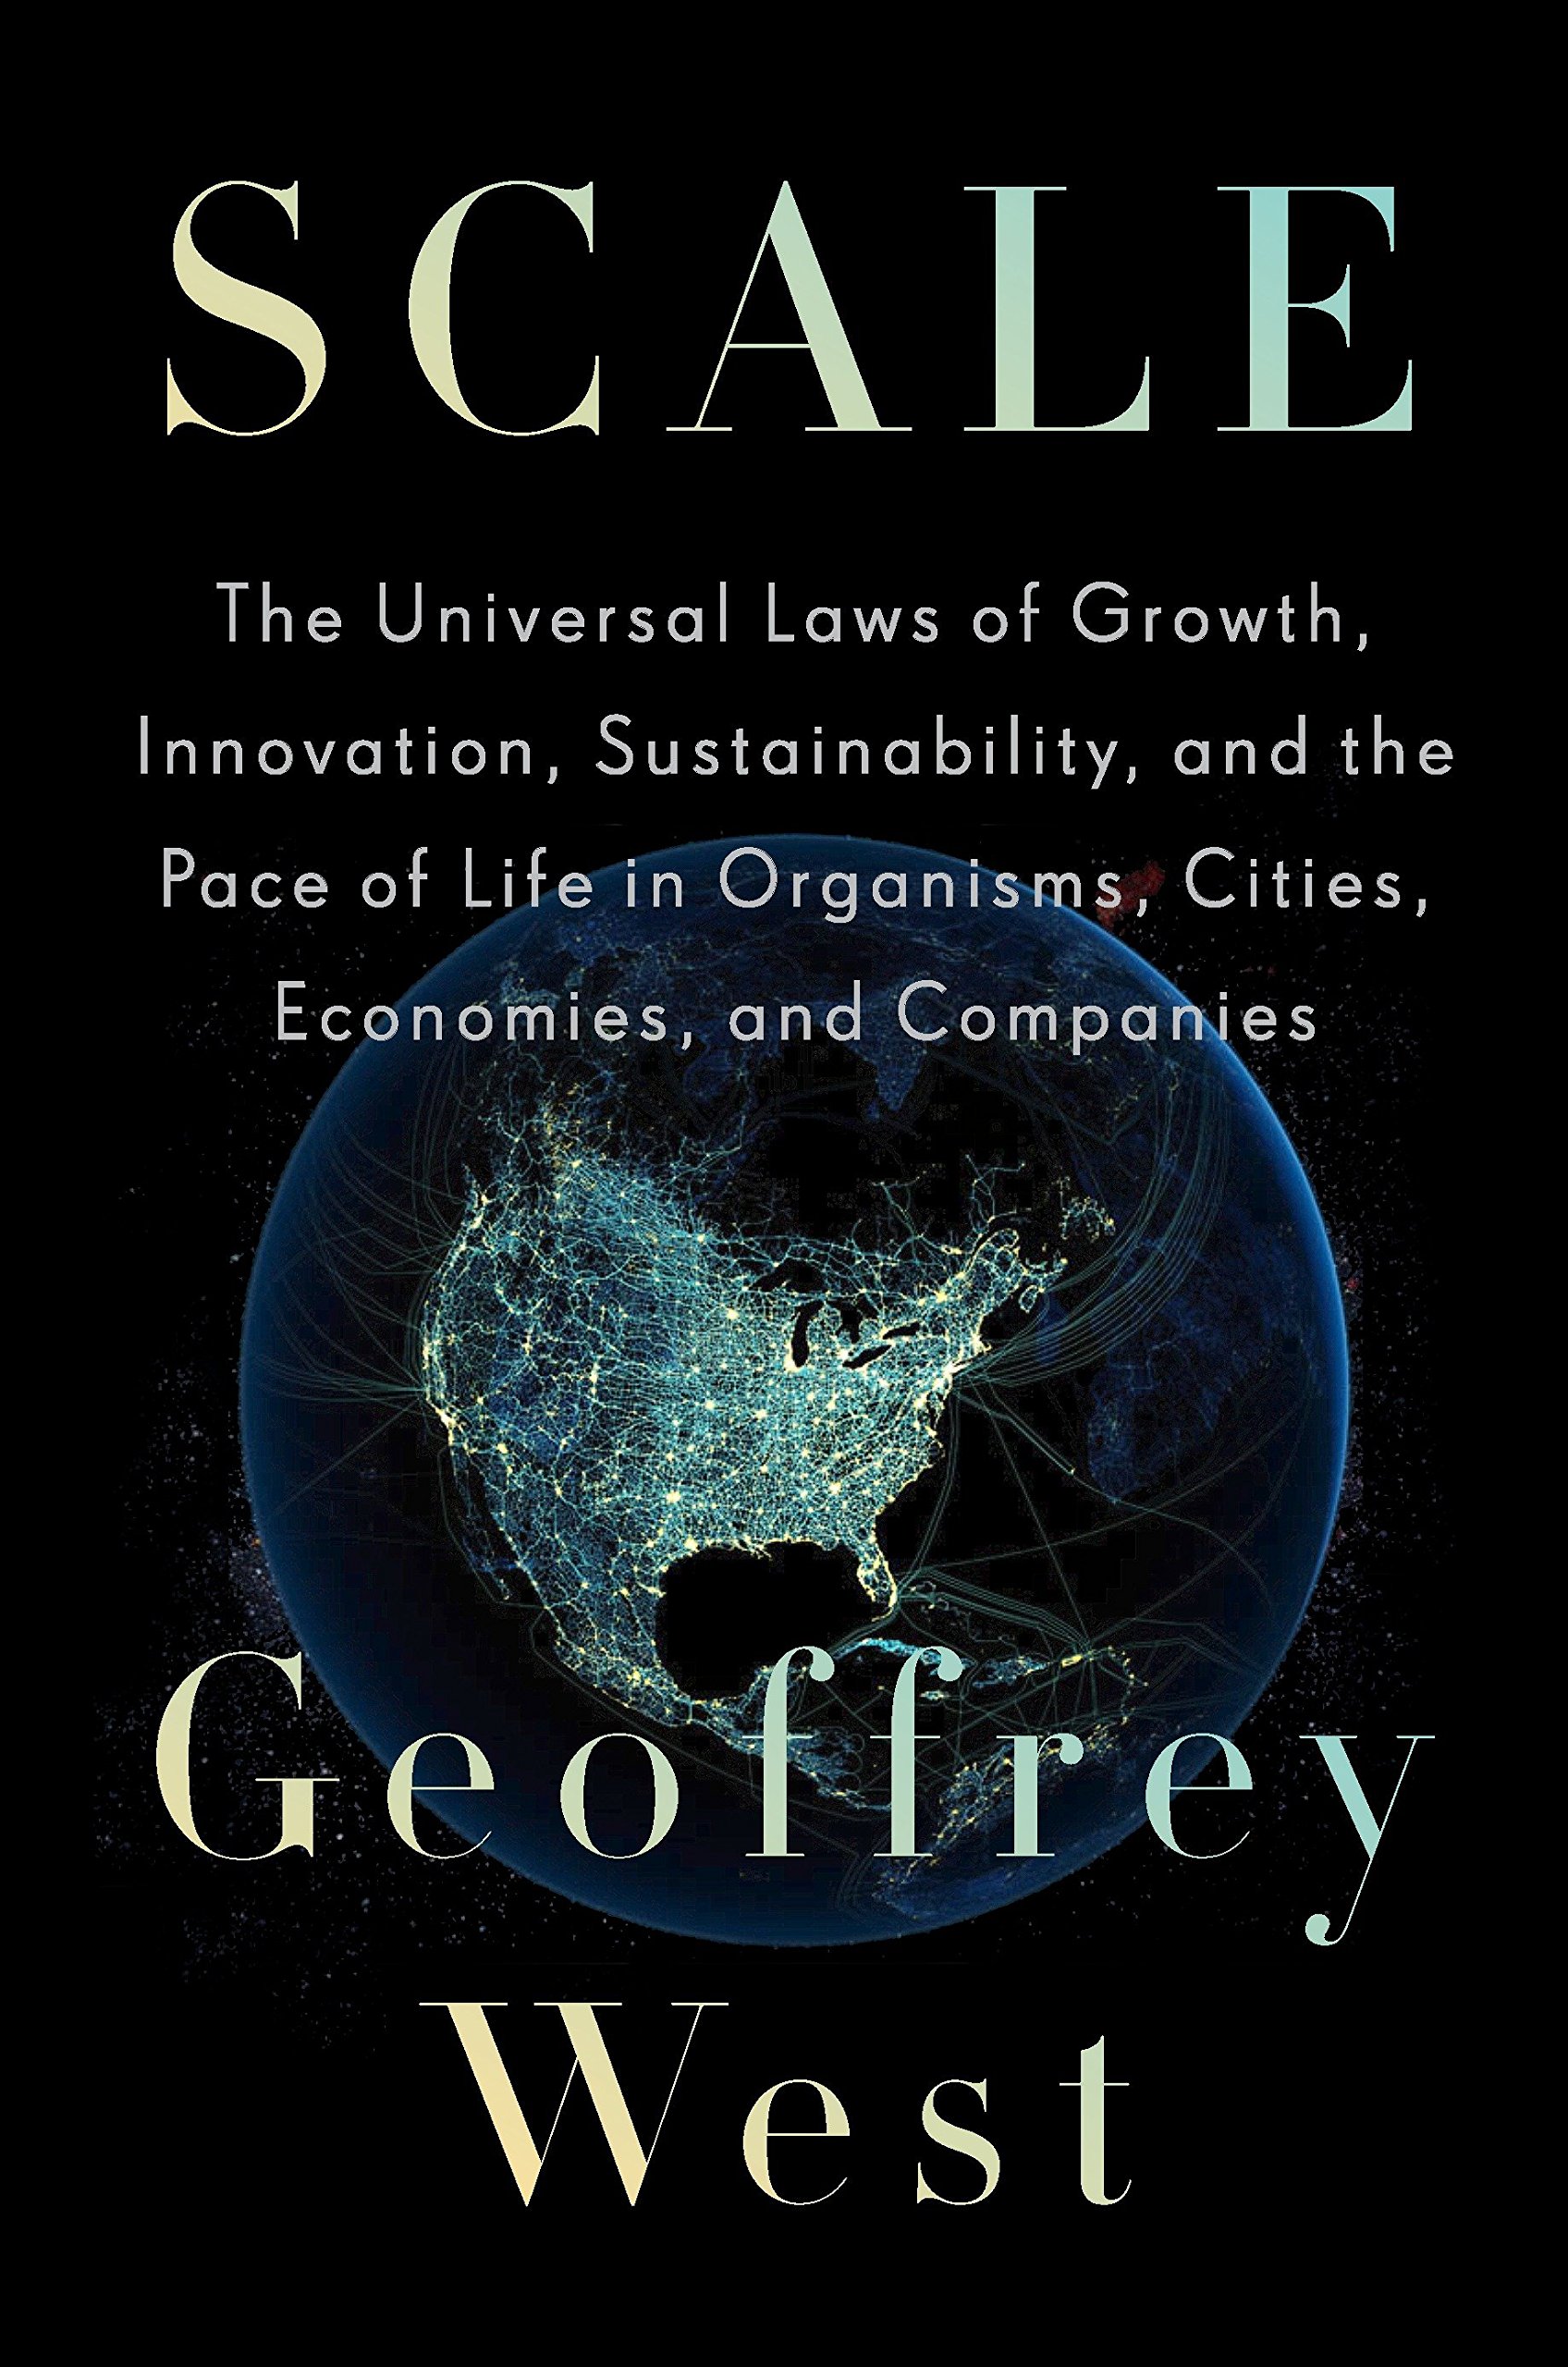 Book Cover Scale: The Universal Laws of Growth, Innovation, Sustainability, and the Pace of Life in Organisms, Cities, Economies, and Companies